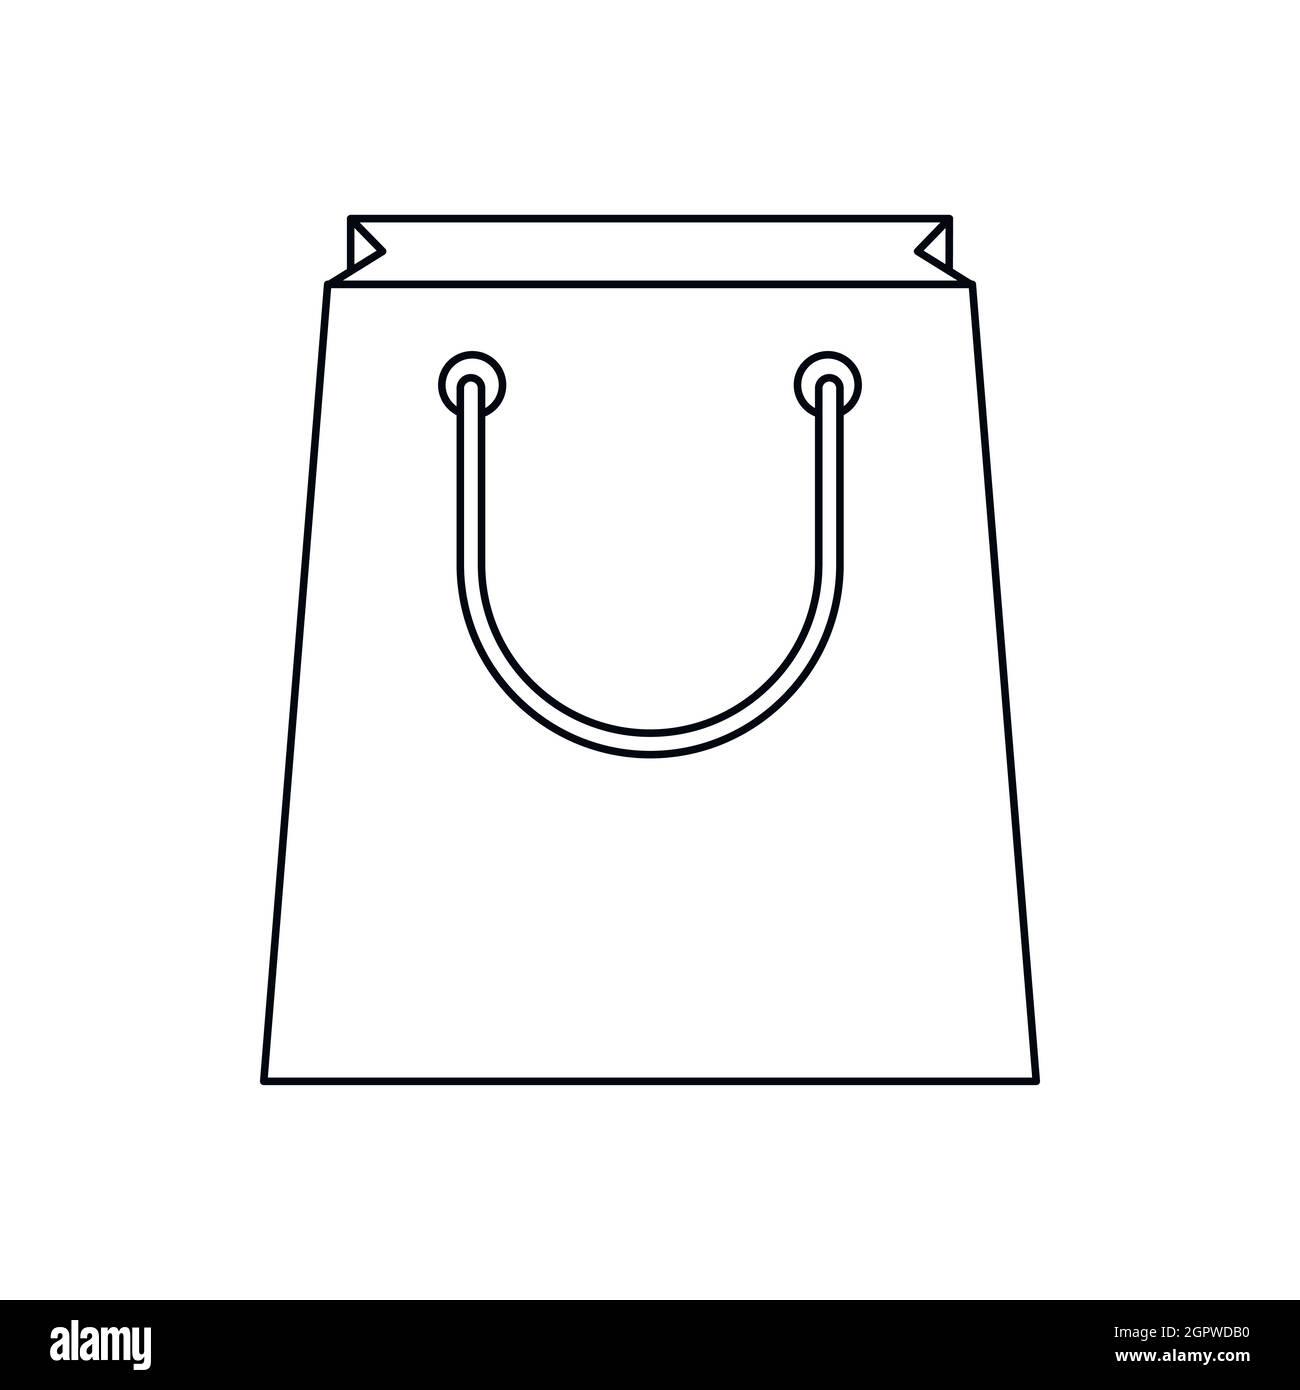 Black Purse Isolated: Over 44,415 Royalty-Free Licensable Stock  Illustrations & Drawings | Shutterstock